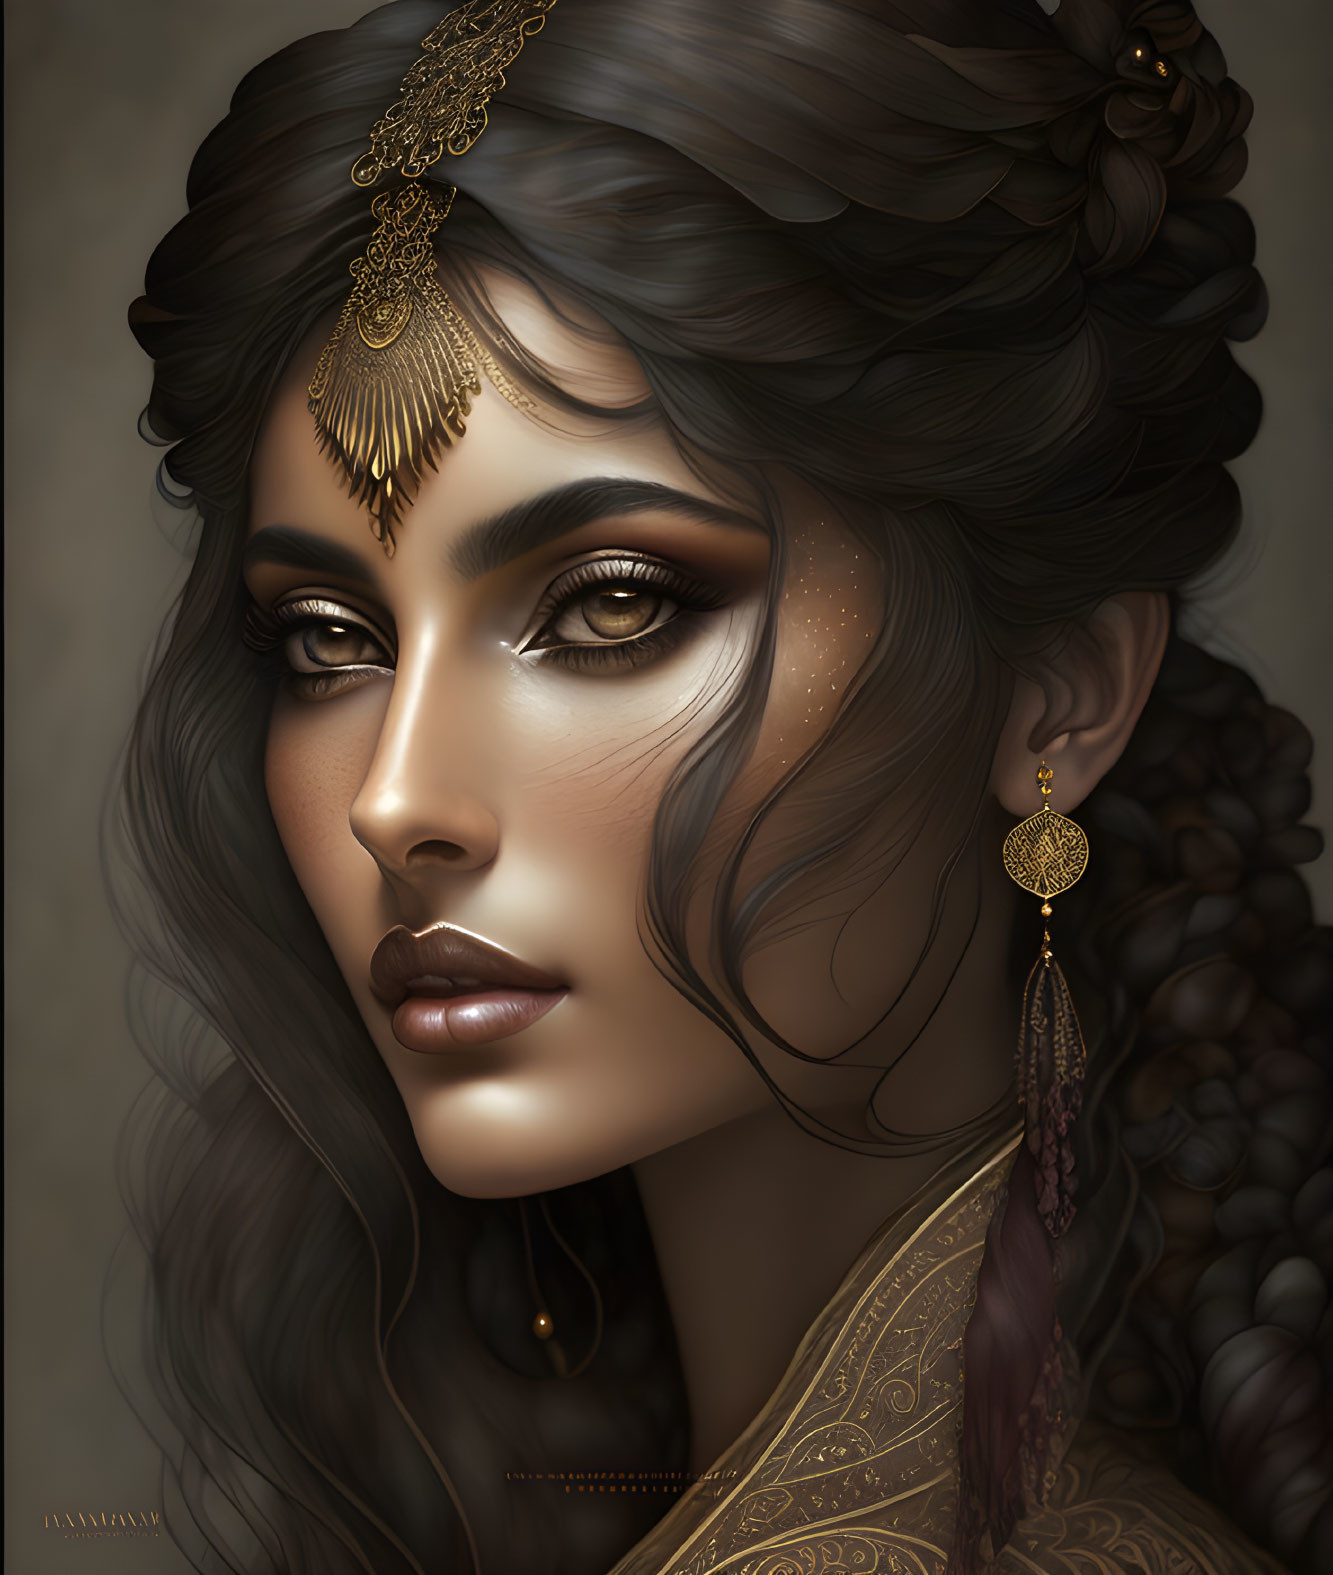 Detailed digital portrait: Woman with striking eyes, adorned in intricate gold jewelry and traditional headpiece.